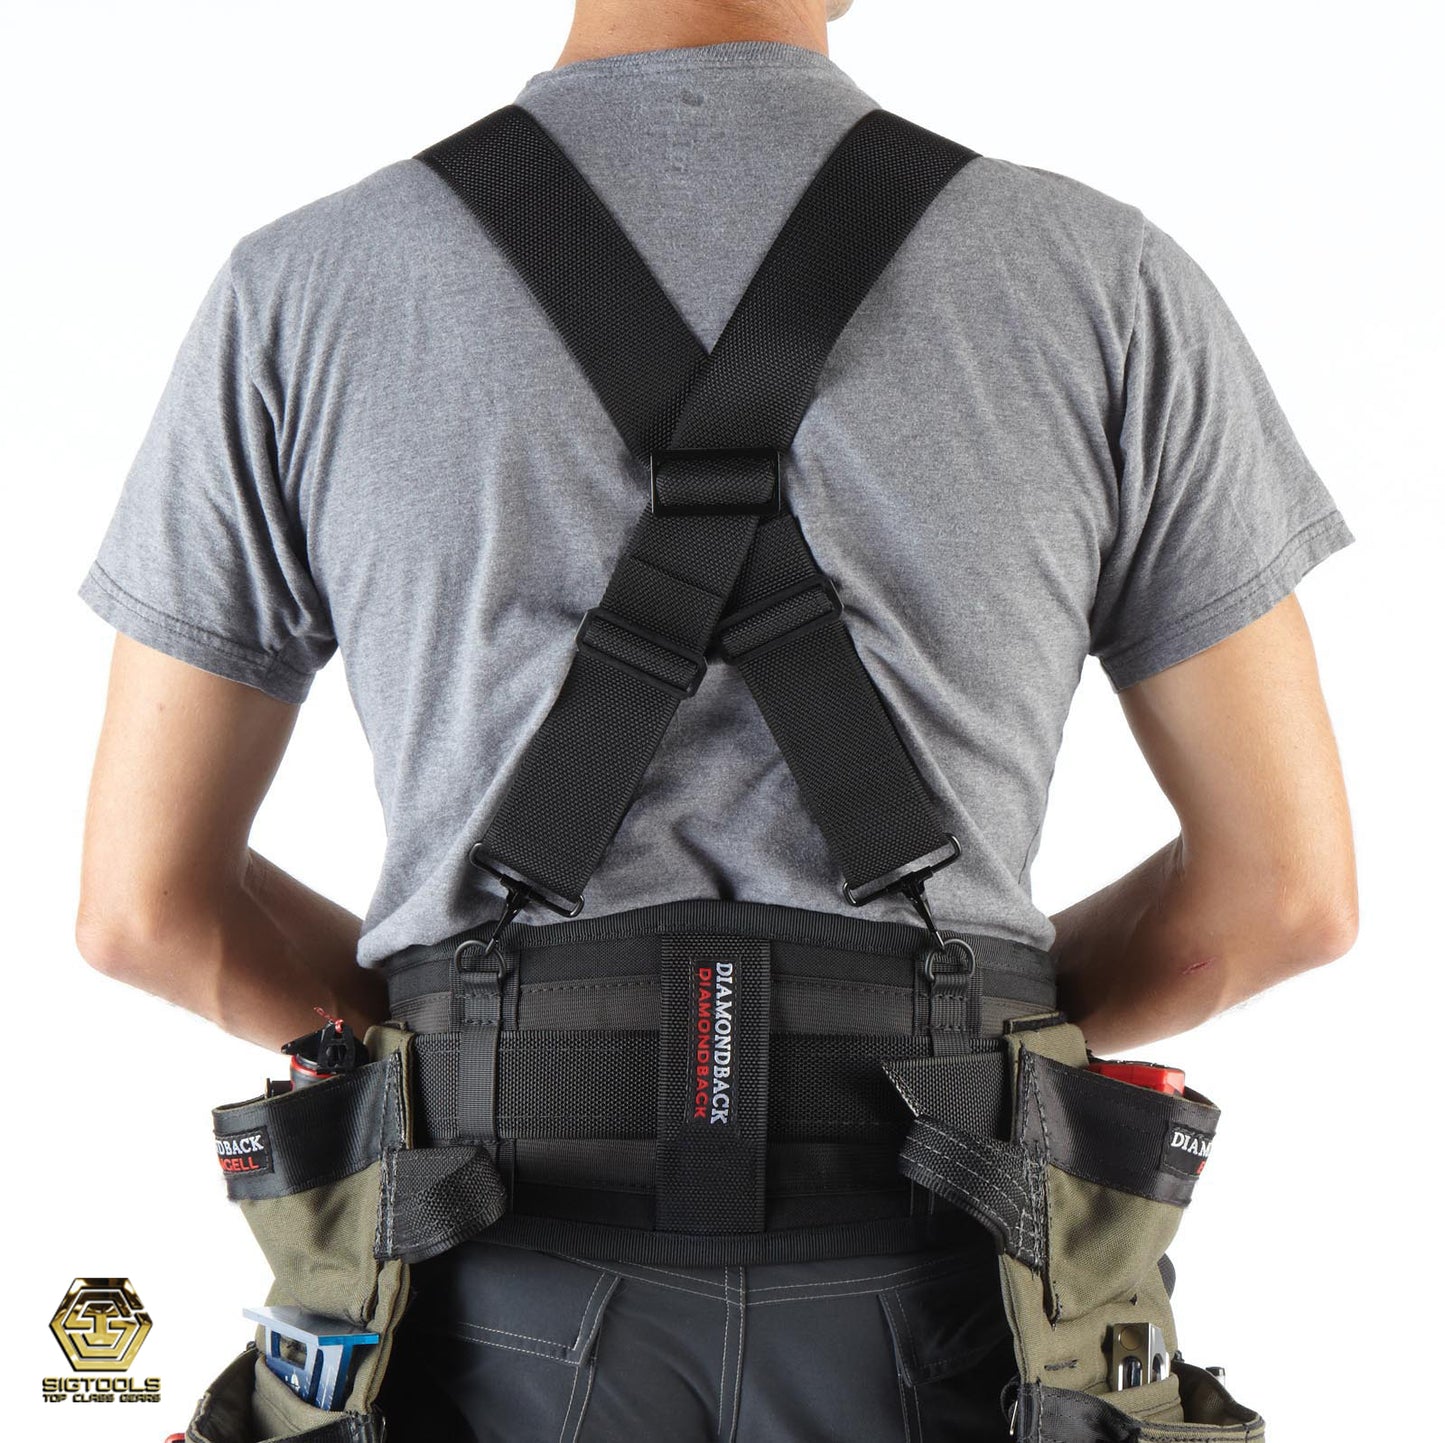 "Rear view of the Diamondback Basic Suspenders - Reliable Support for Your Work Gear"